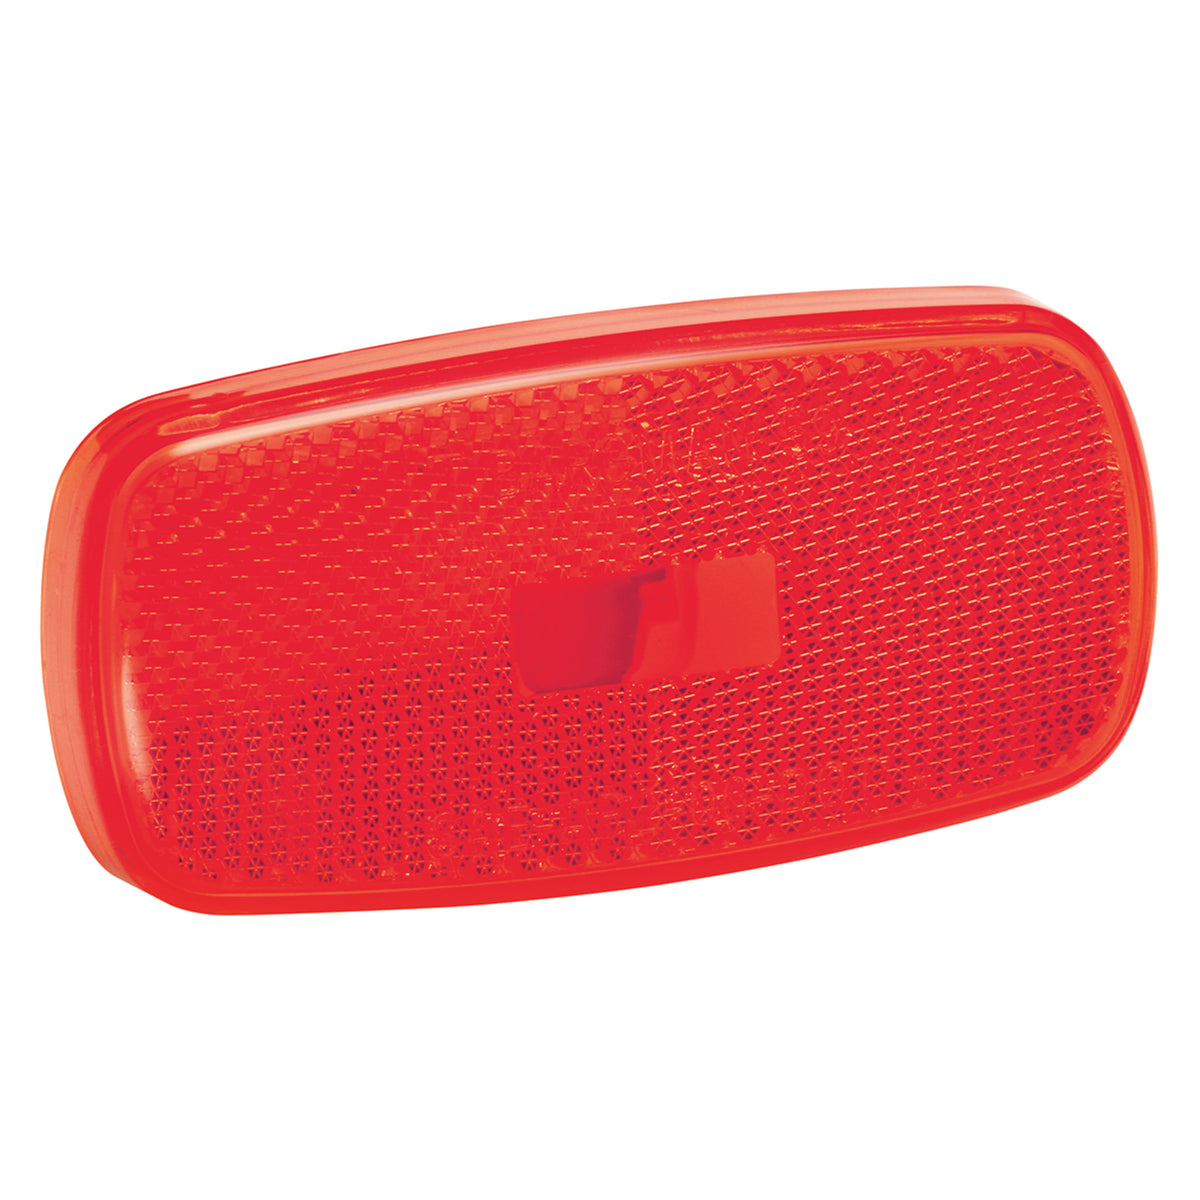 Bargman 34-59-010 Clearance/Side Marker Lights #59 Series Lens Only, 10 Pack - Red